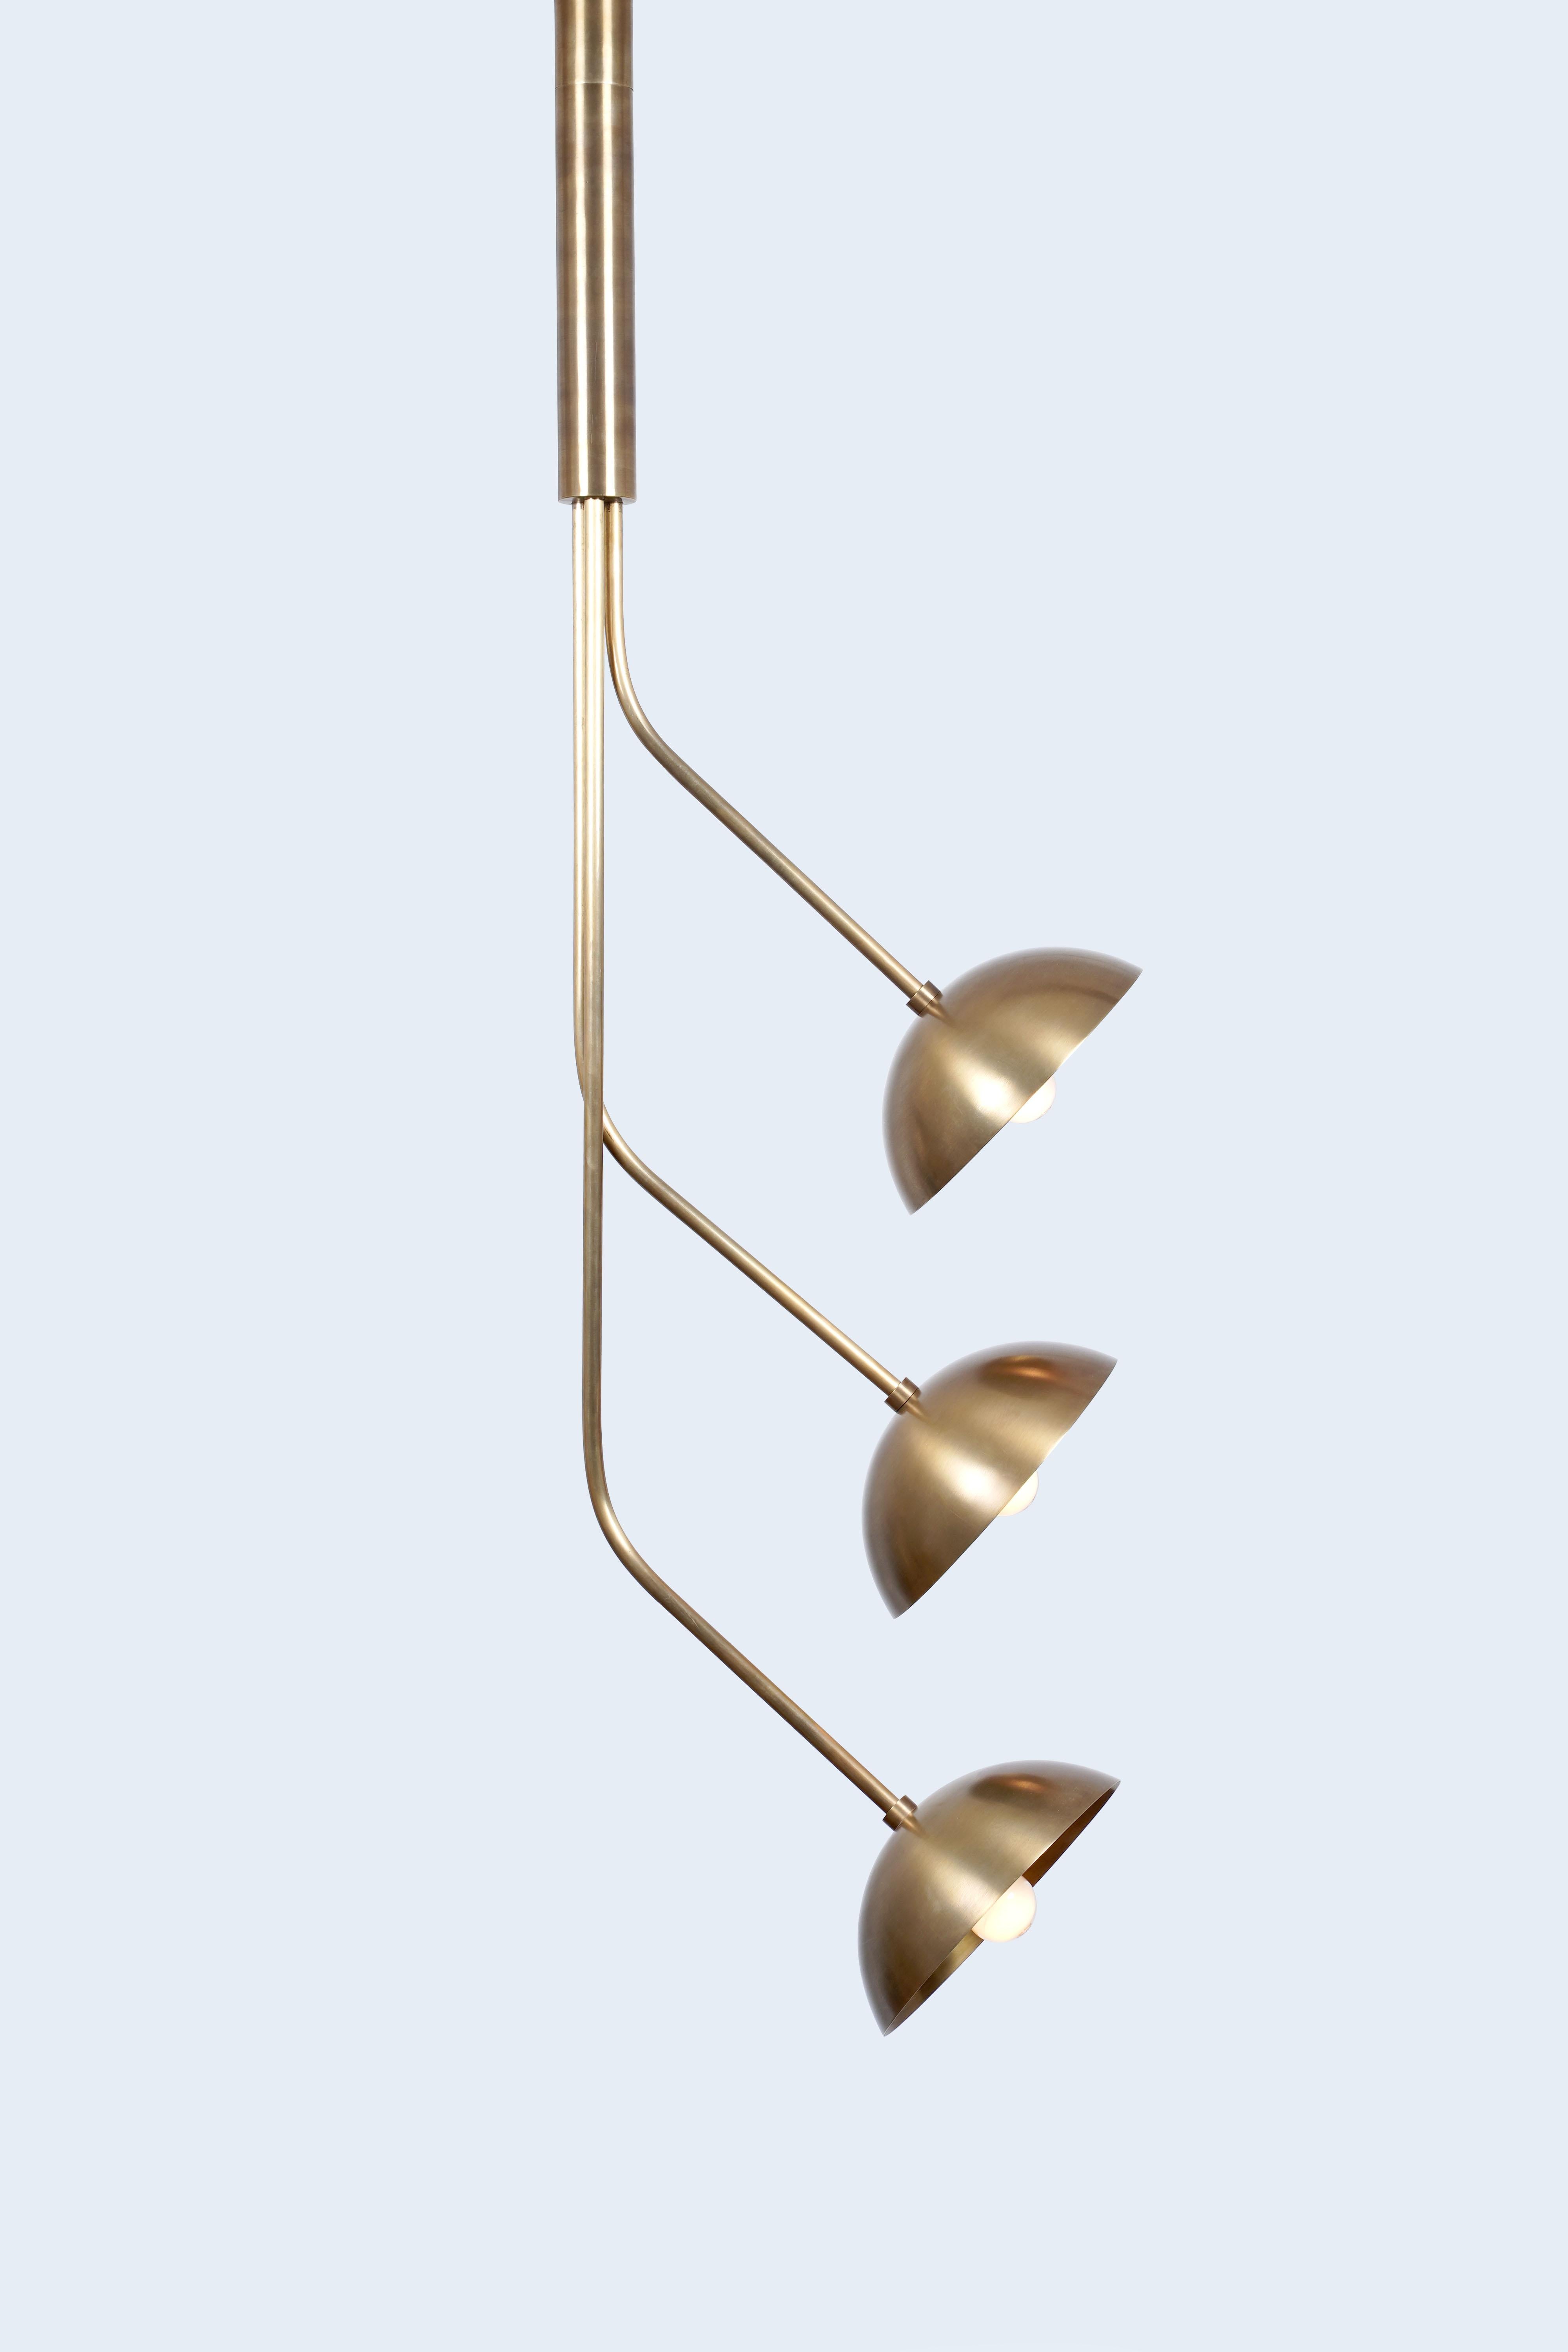 Post-Modern Rhythm 3 Brass Dome Pendant Lamp by Lamp Shaper For Sale